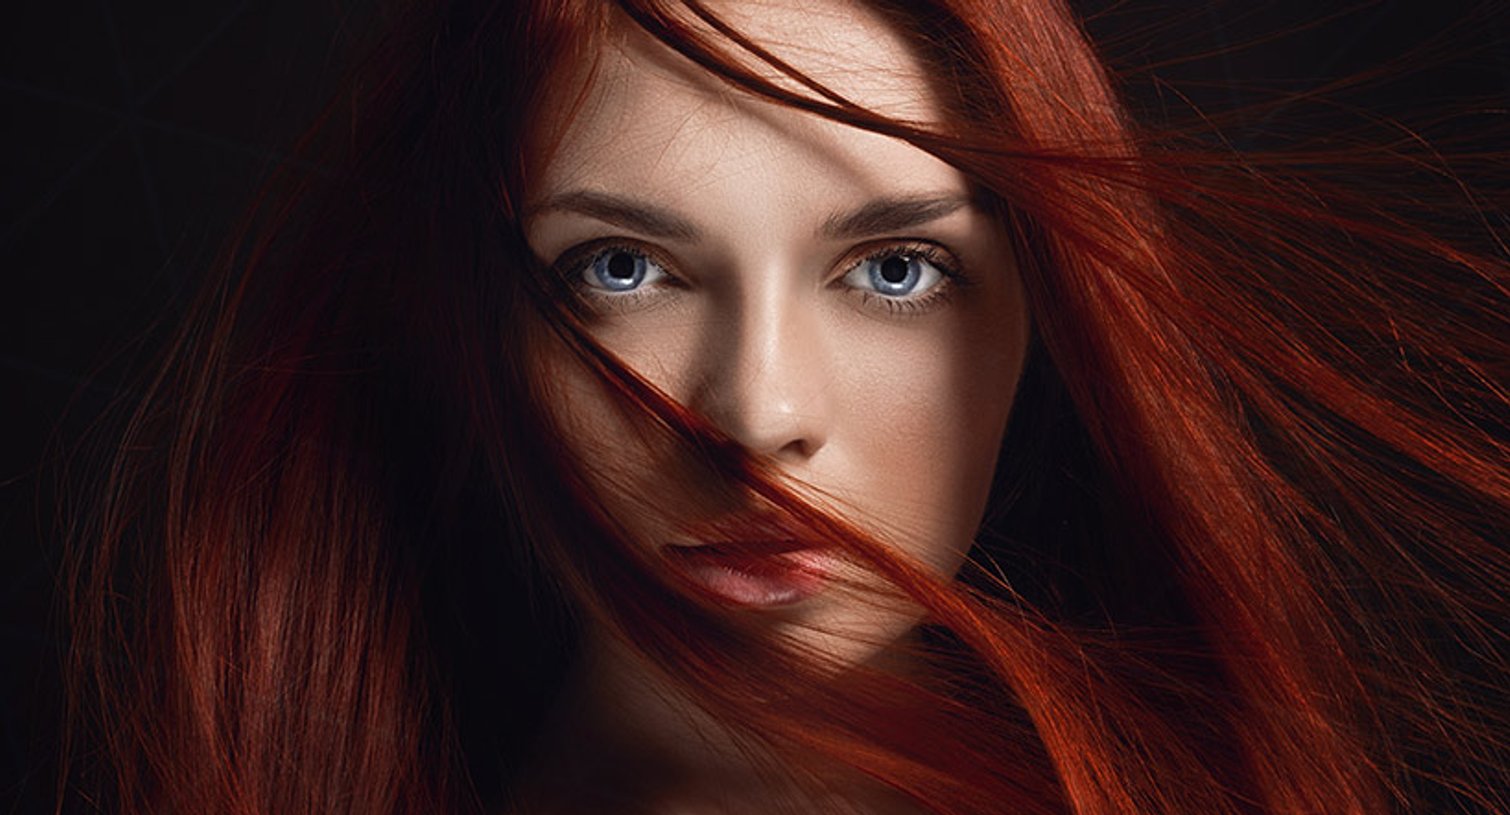 Loreal Paris BMAG Slideshow How to Get a Bold Red Hair Color SLIDE 1